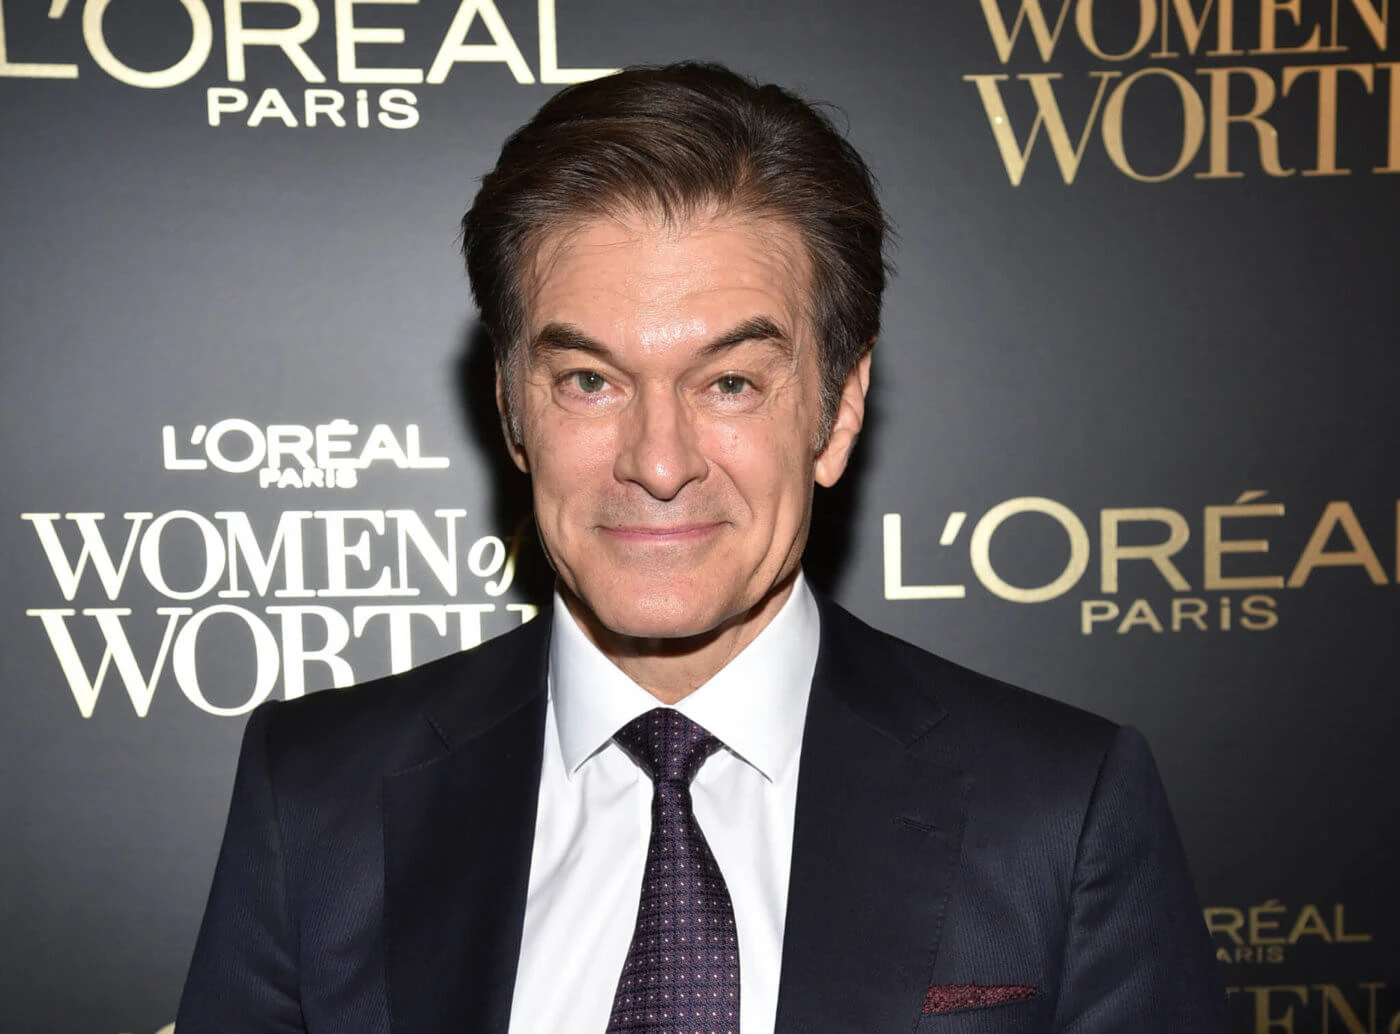 FILE - This Dec. 4, 2019 file photo shows Dr. Mehmet Oz at the 14th annual L'Oreal Paris Women of Worth Gala in New York.  Oz, joins the Republican field of possible candidates aiming to capture Pennsylvania's open US Senate seat in next year's election. (Photo by Evan Agostini/Invision/AP, File)